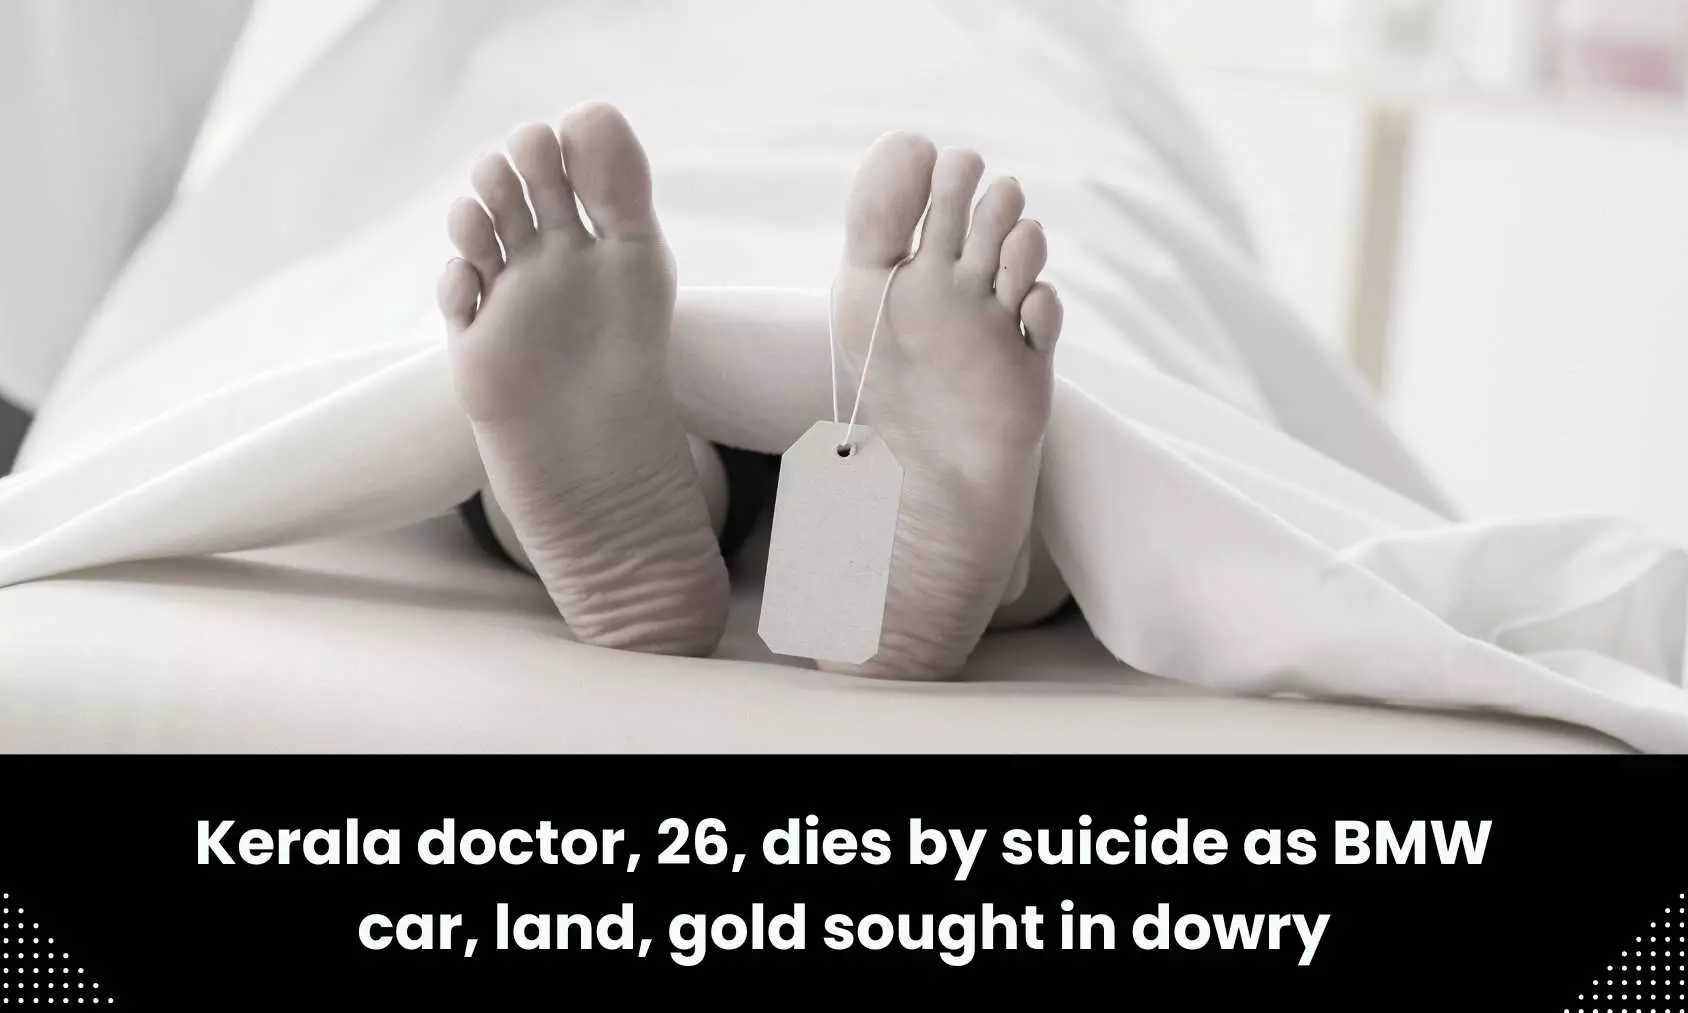 Wedding called off over dowry: 26 year old doctor ends life